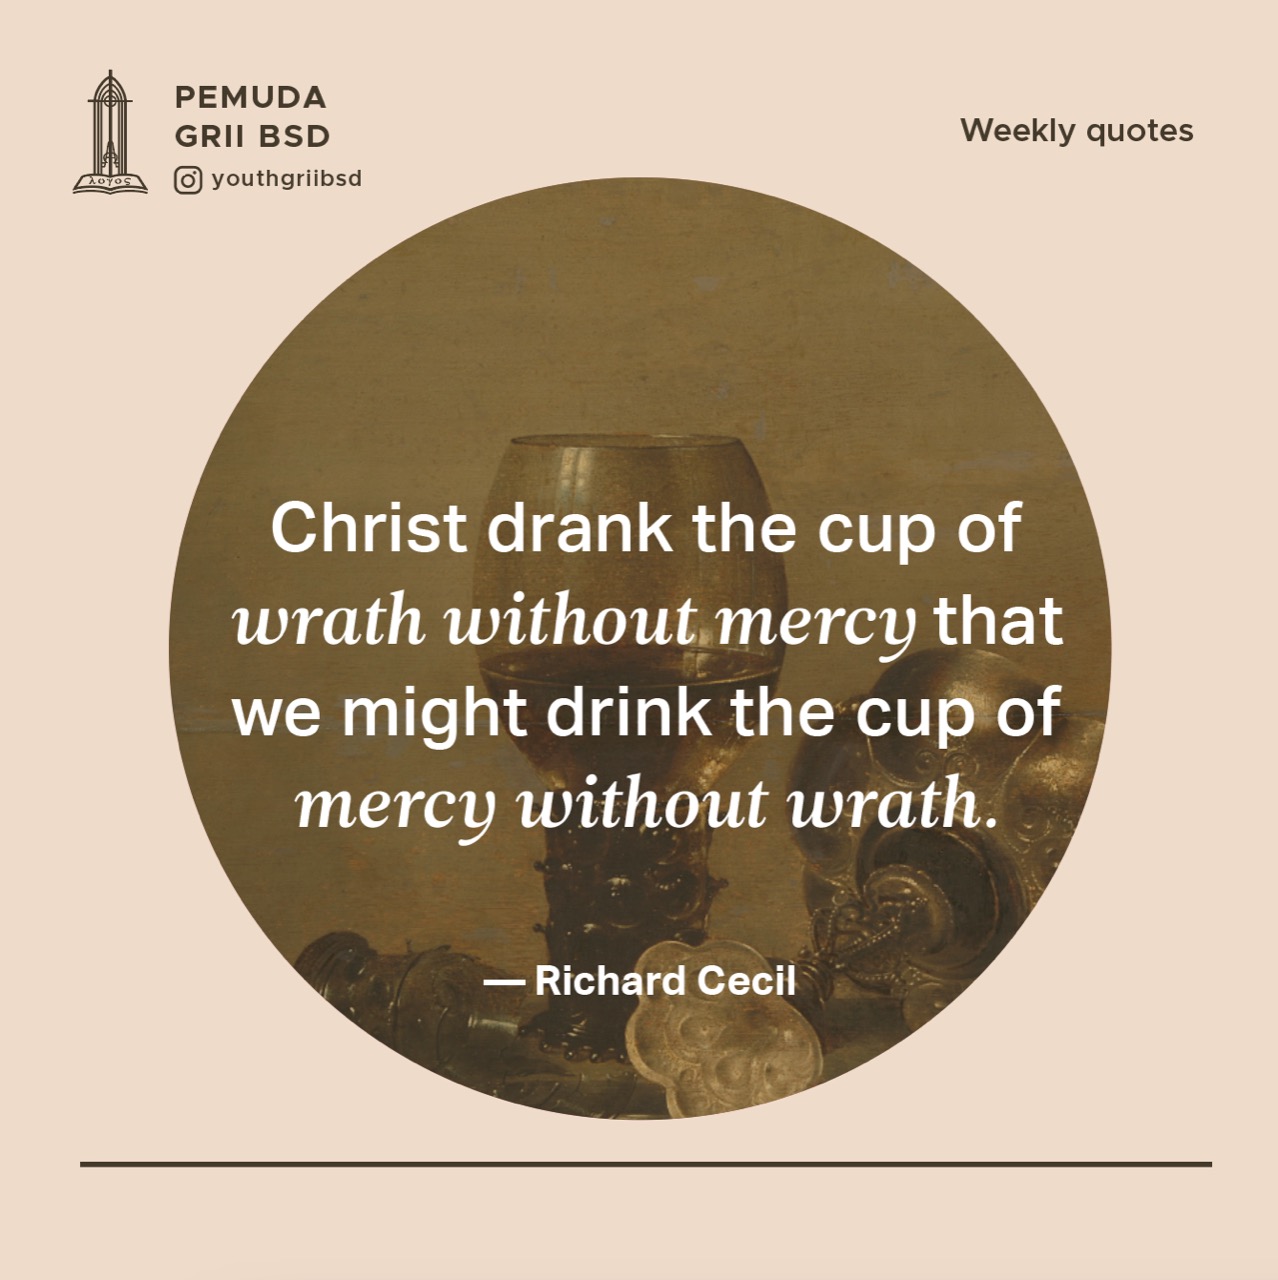 Christ drank the cup of wrath without mercy that we might drink the cup of mercy without wrath.